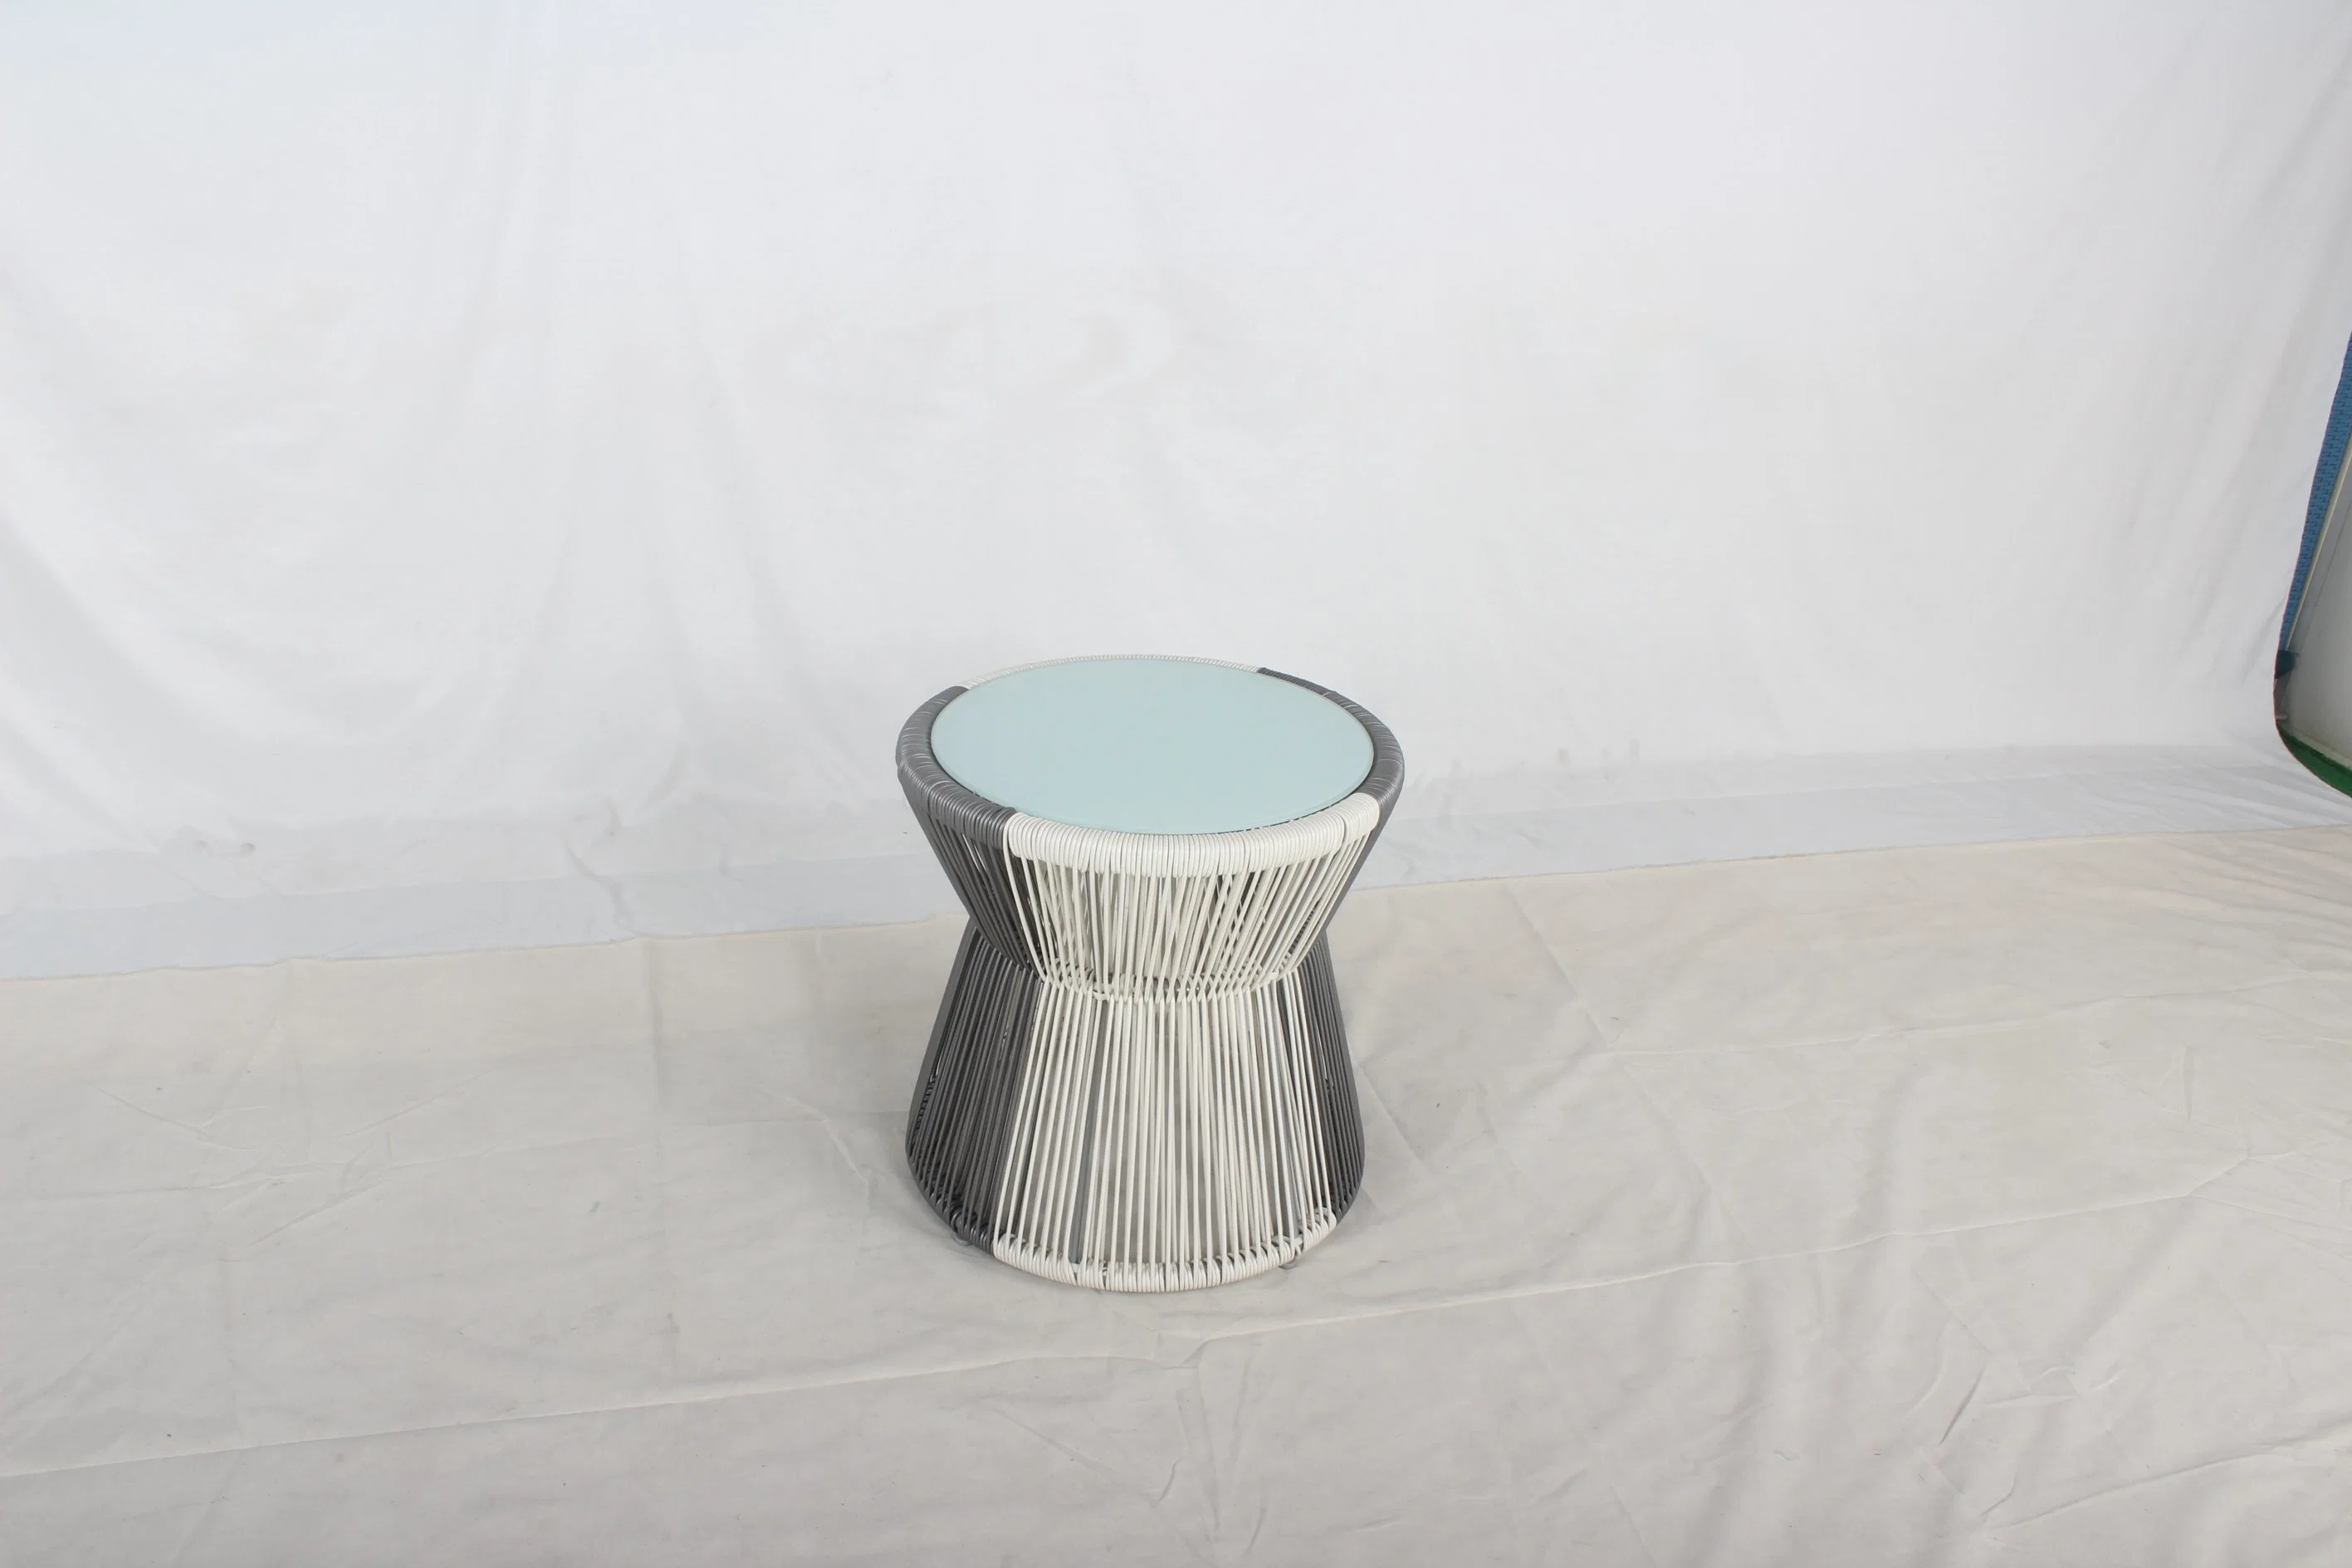 Round Rattan Weaving Coffee Table Outdoor Furniture with Glass Top